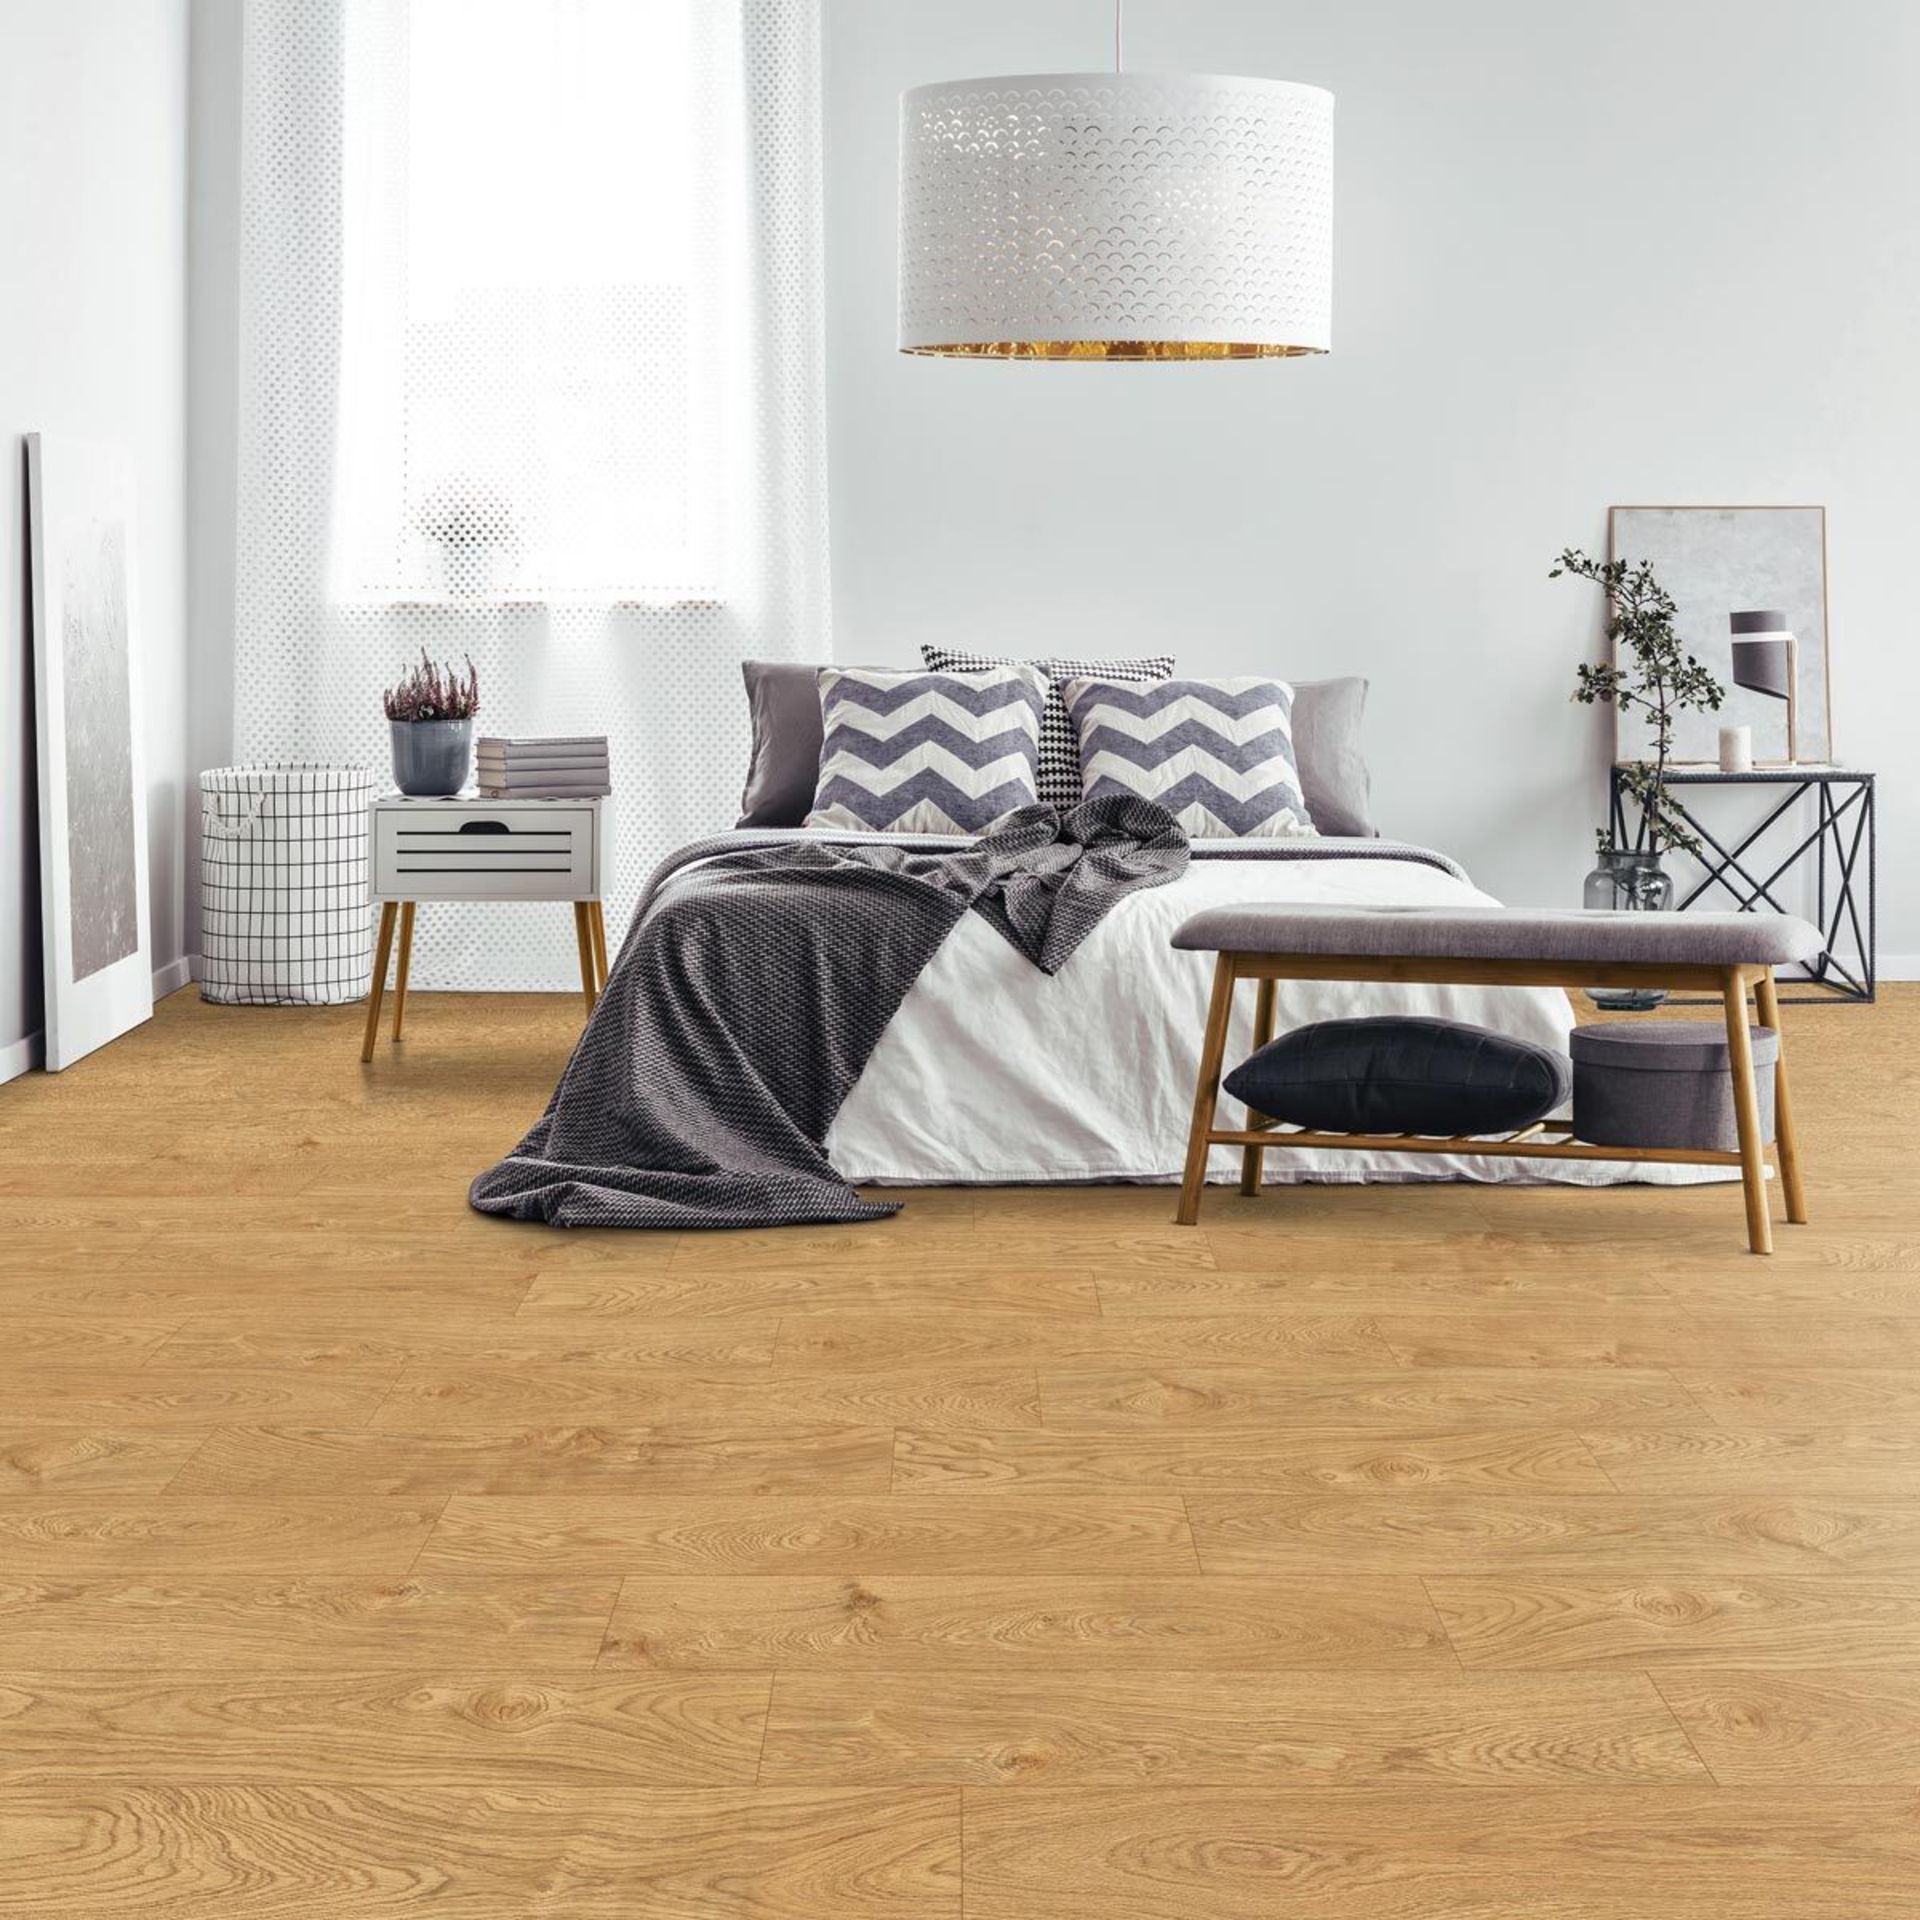 1 BOXED GOLDEN SELECT TOASTED HONEY SPLASH SHIELD AC5 LAMINATE FLOORING WITH FOAM UNDERLAY (COVERS